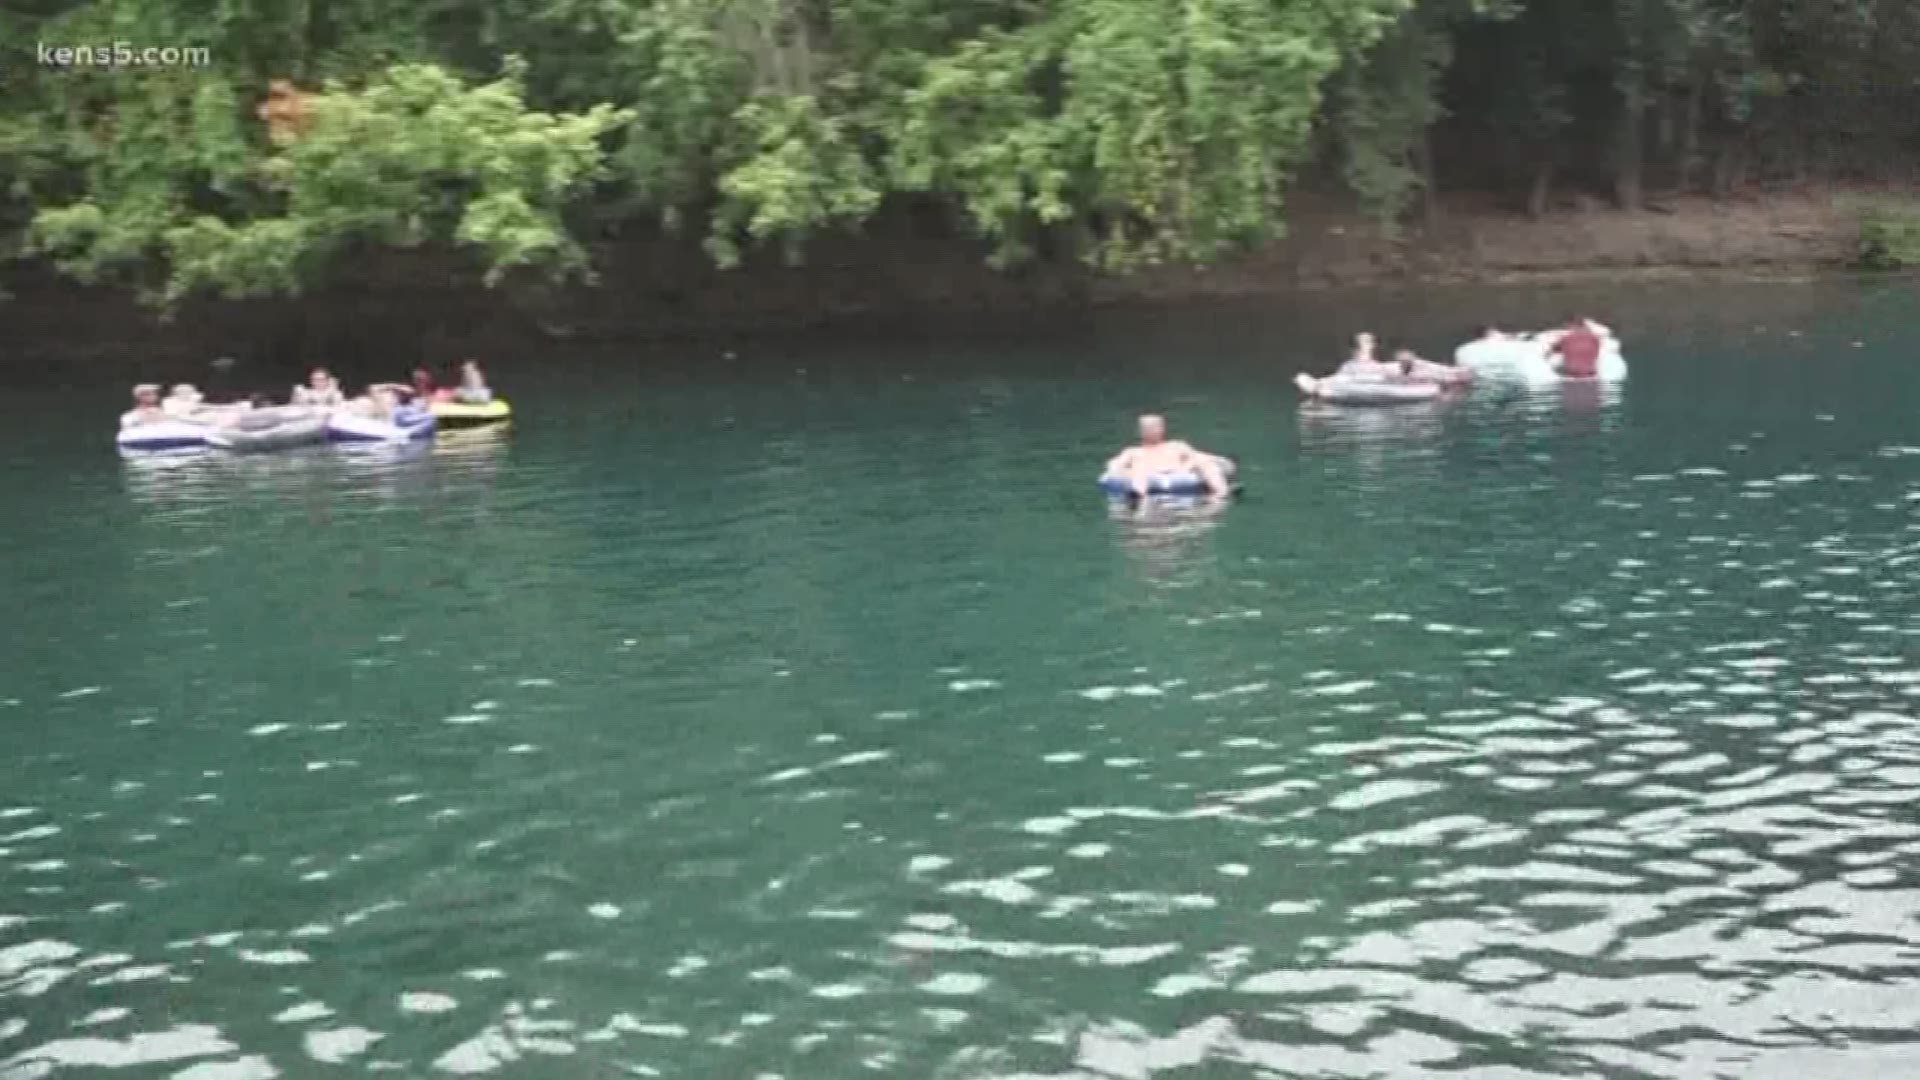 The weather may not be cooperating for everyone's outdoor plans, but the Comal River was full of tubes on Monday. Eyewitness News reporter Jeremy Baker has more.